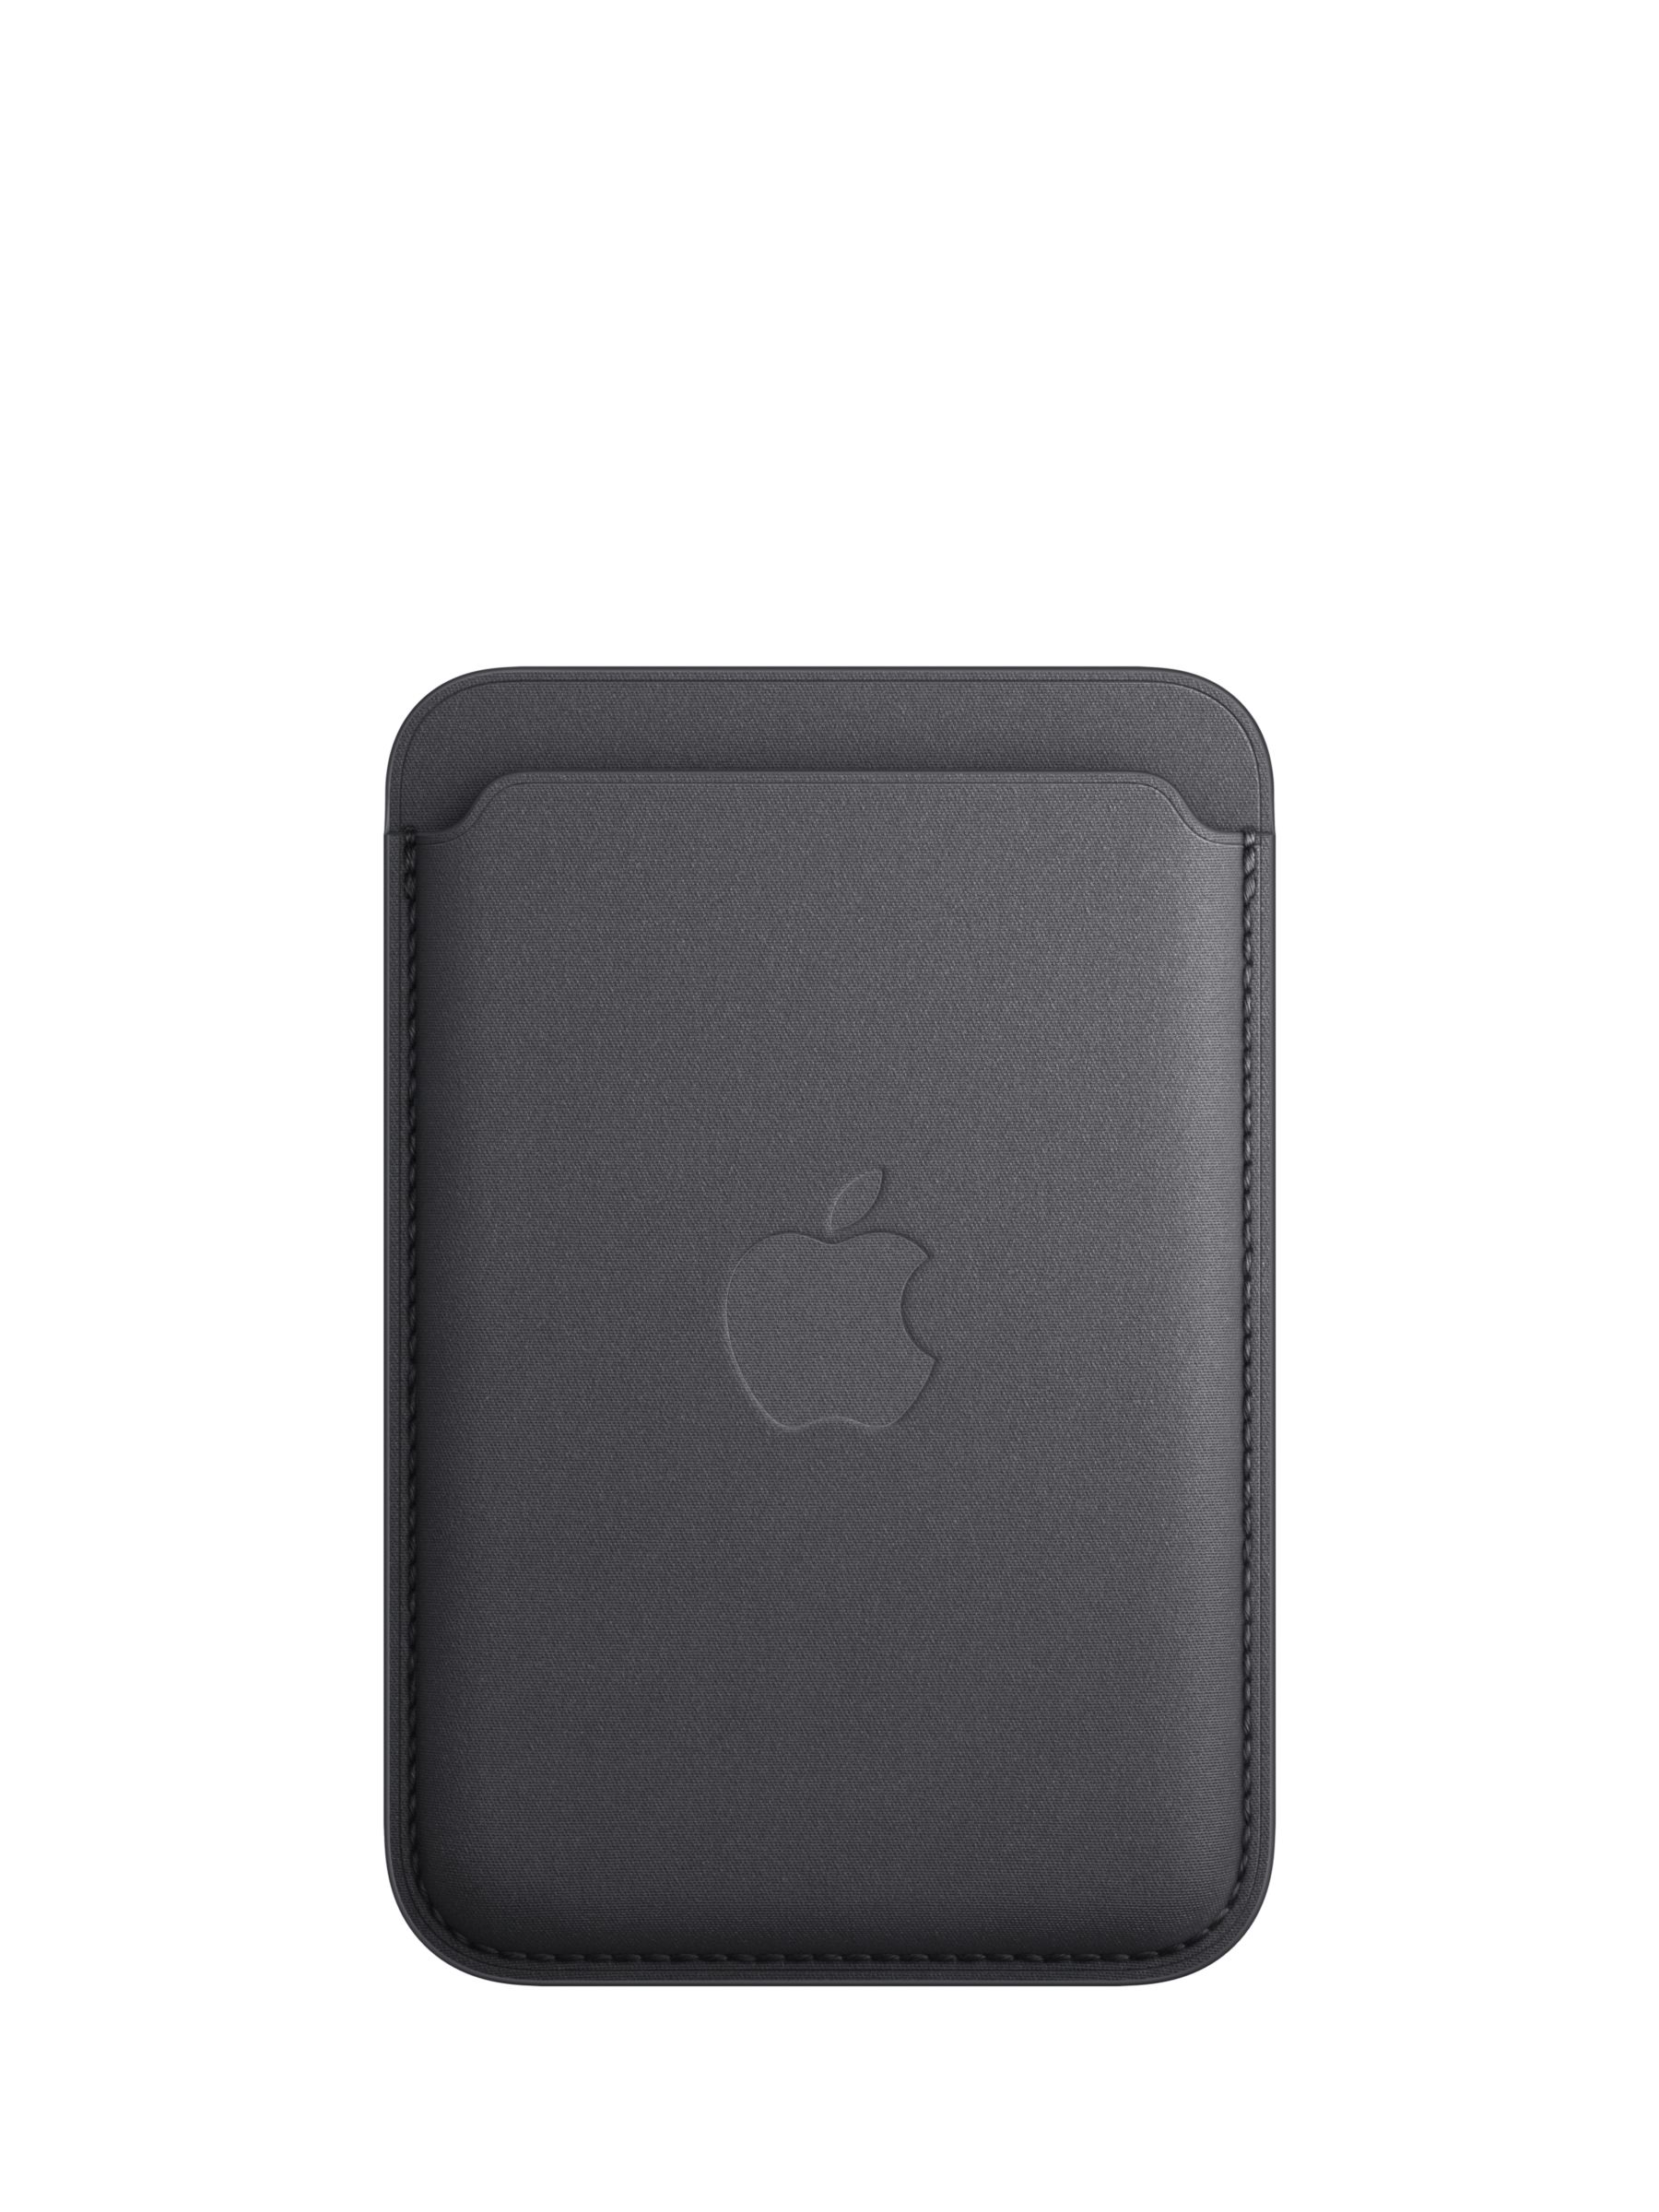 I Love This MagSafe Accessory! MagSafe Wallet Review - Mark Ellis Reviews